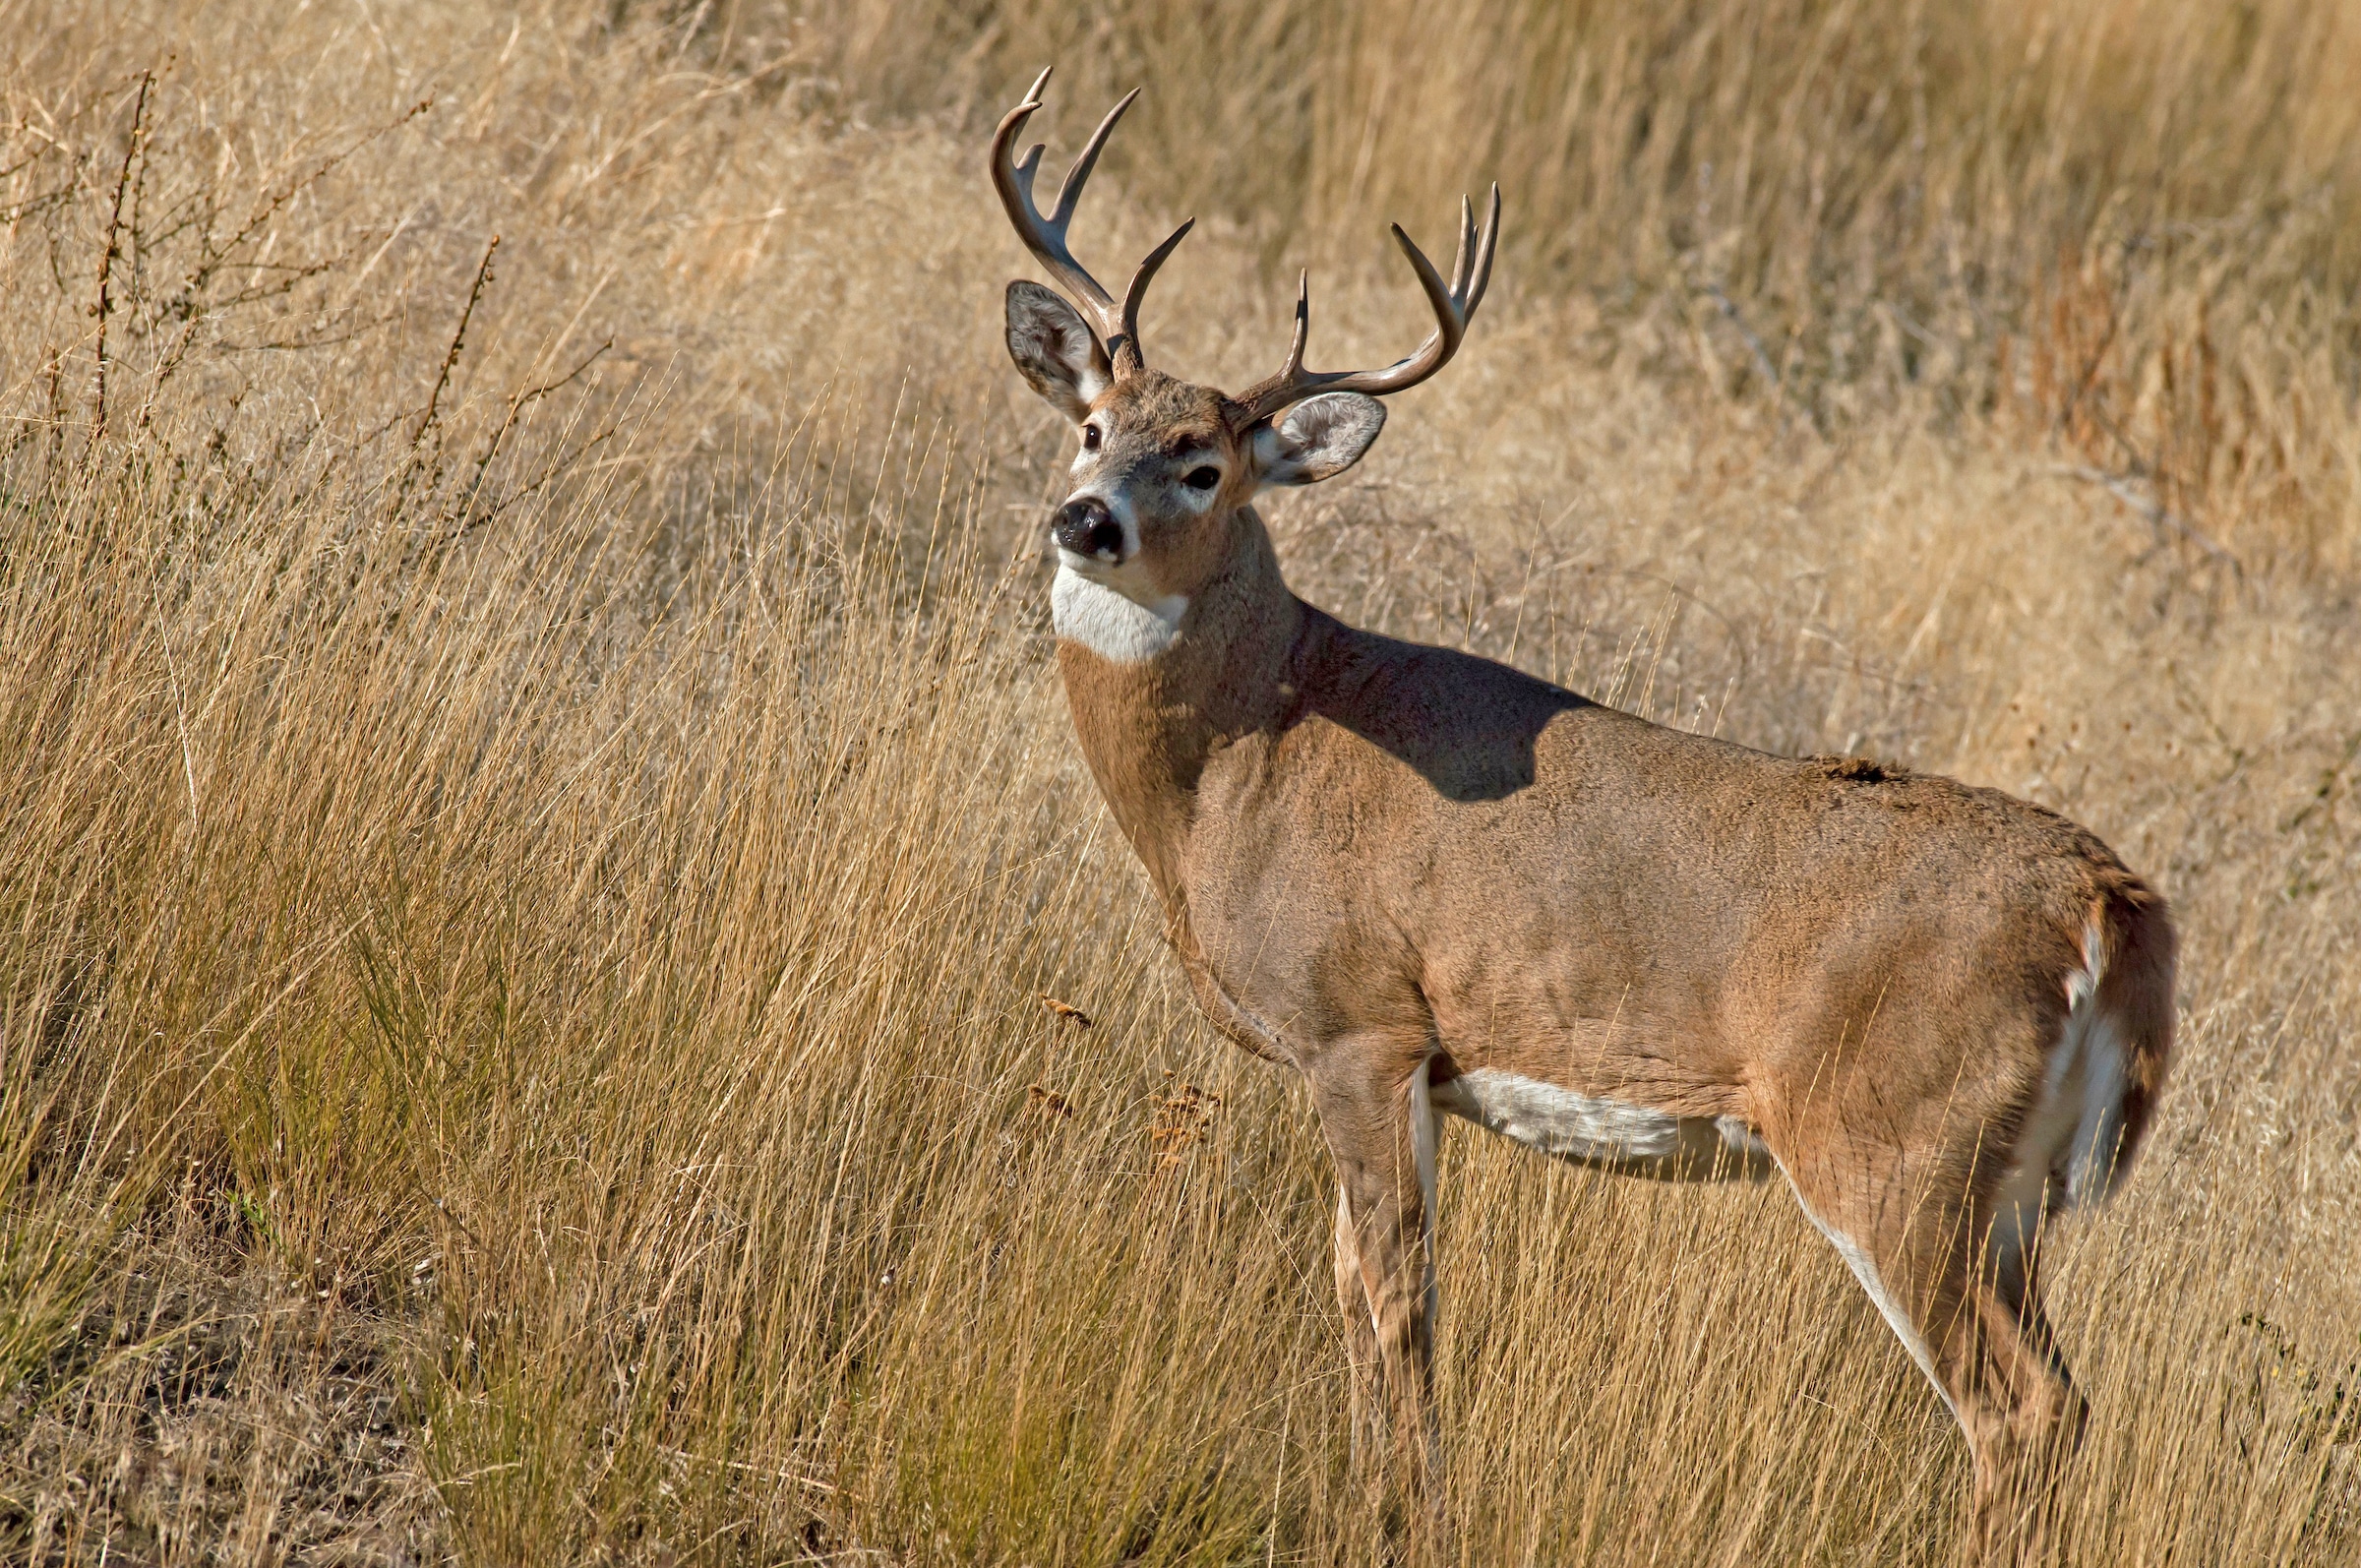 In the best of circumstances, most properties will produce an average antler growth peak of 130-150 inches, even in desirable midwestern destinations.